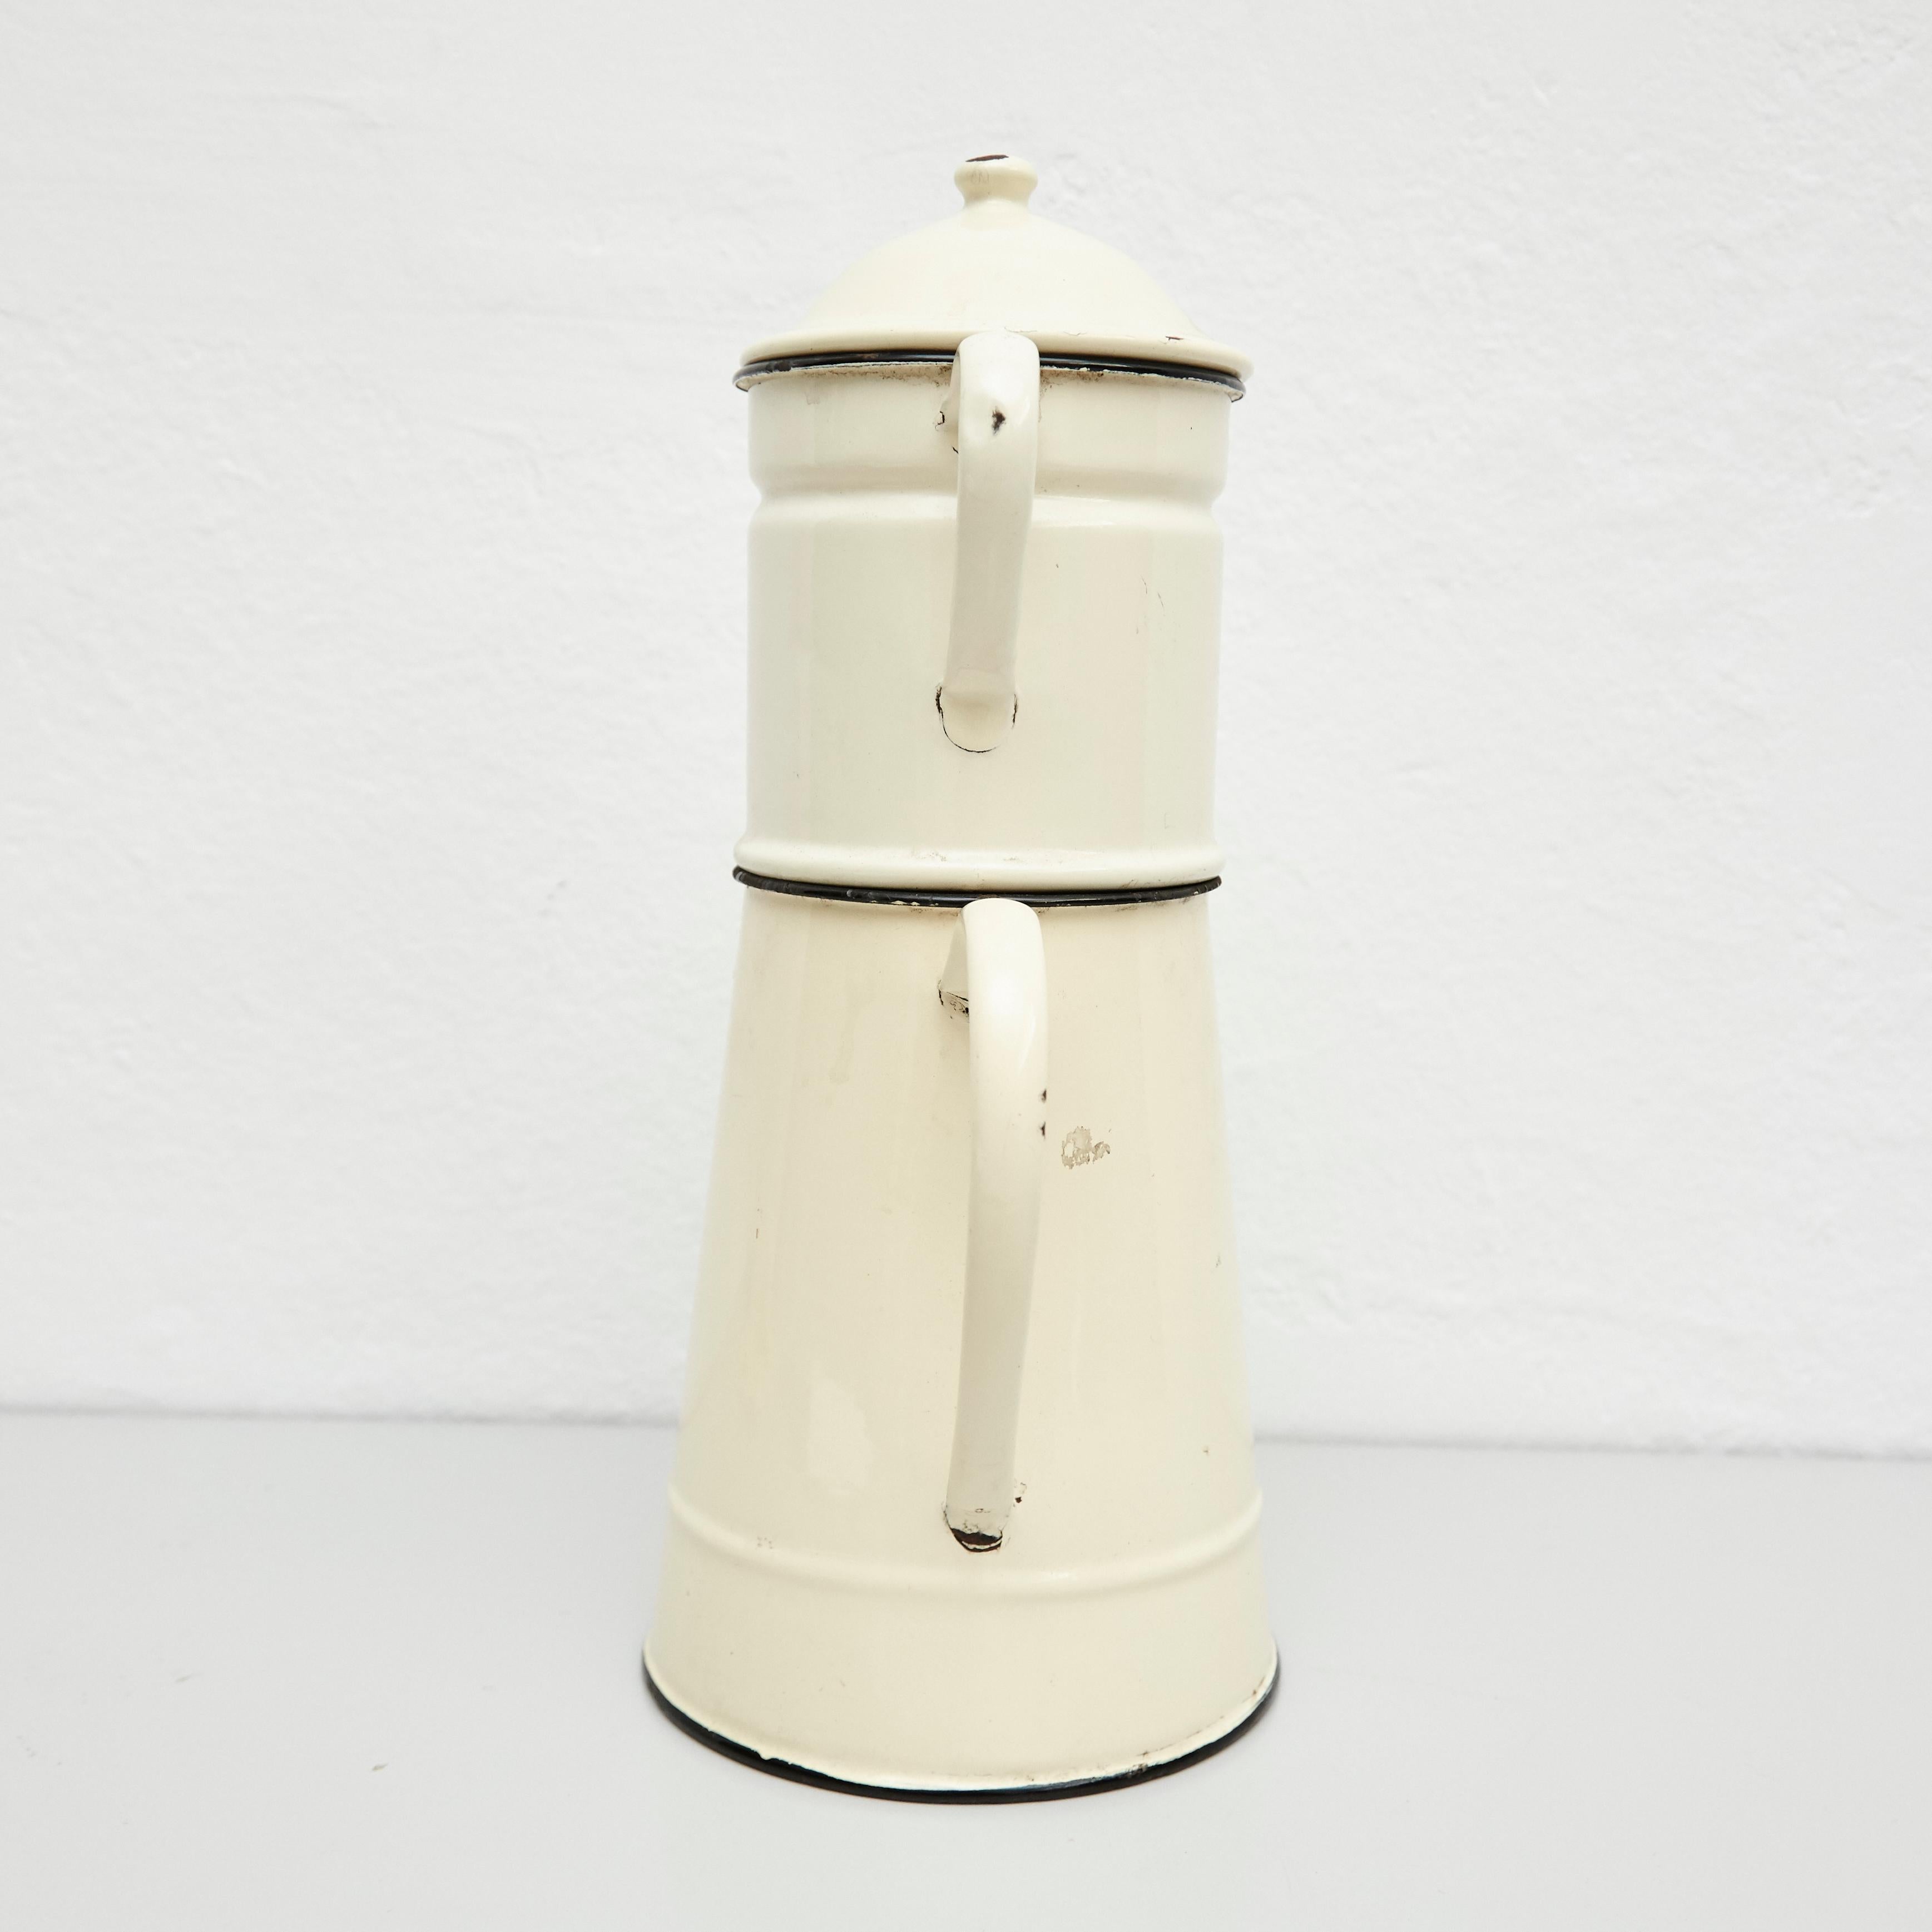 Vintage French enamelware coffee maker.
By unknown manufacturer, France, circa 1920.

In original condition, with minor wear consistent with age and use, preserving a beautiful patina.

Materials:
Enameled metal

Dimensions:
D 17 cm x W 28